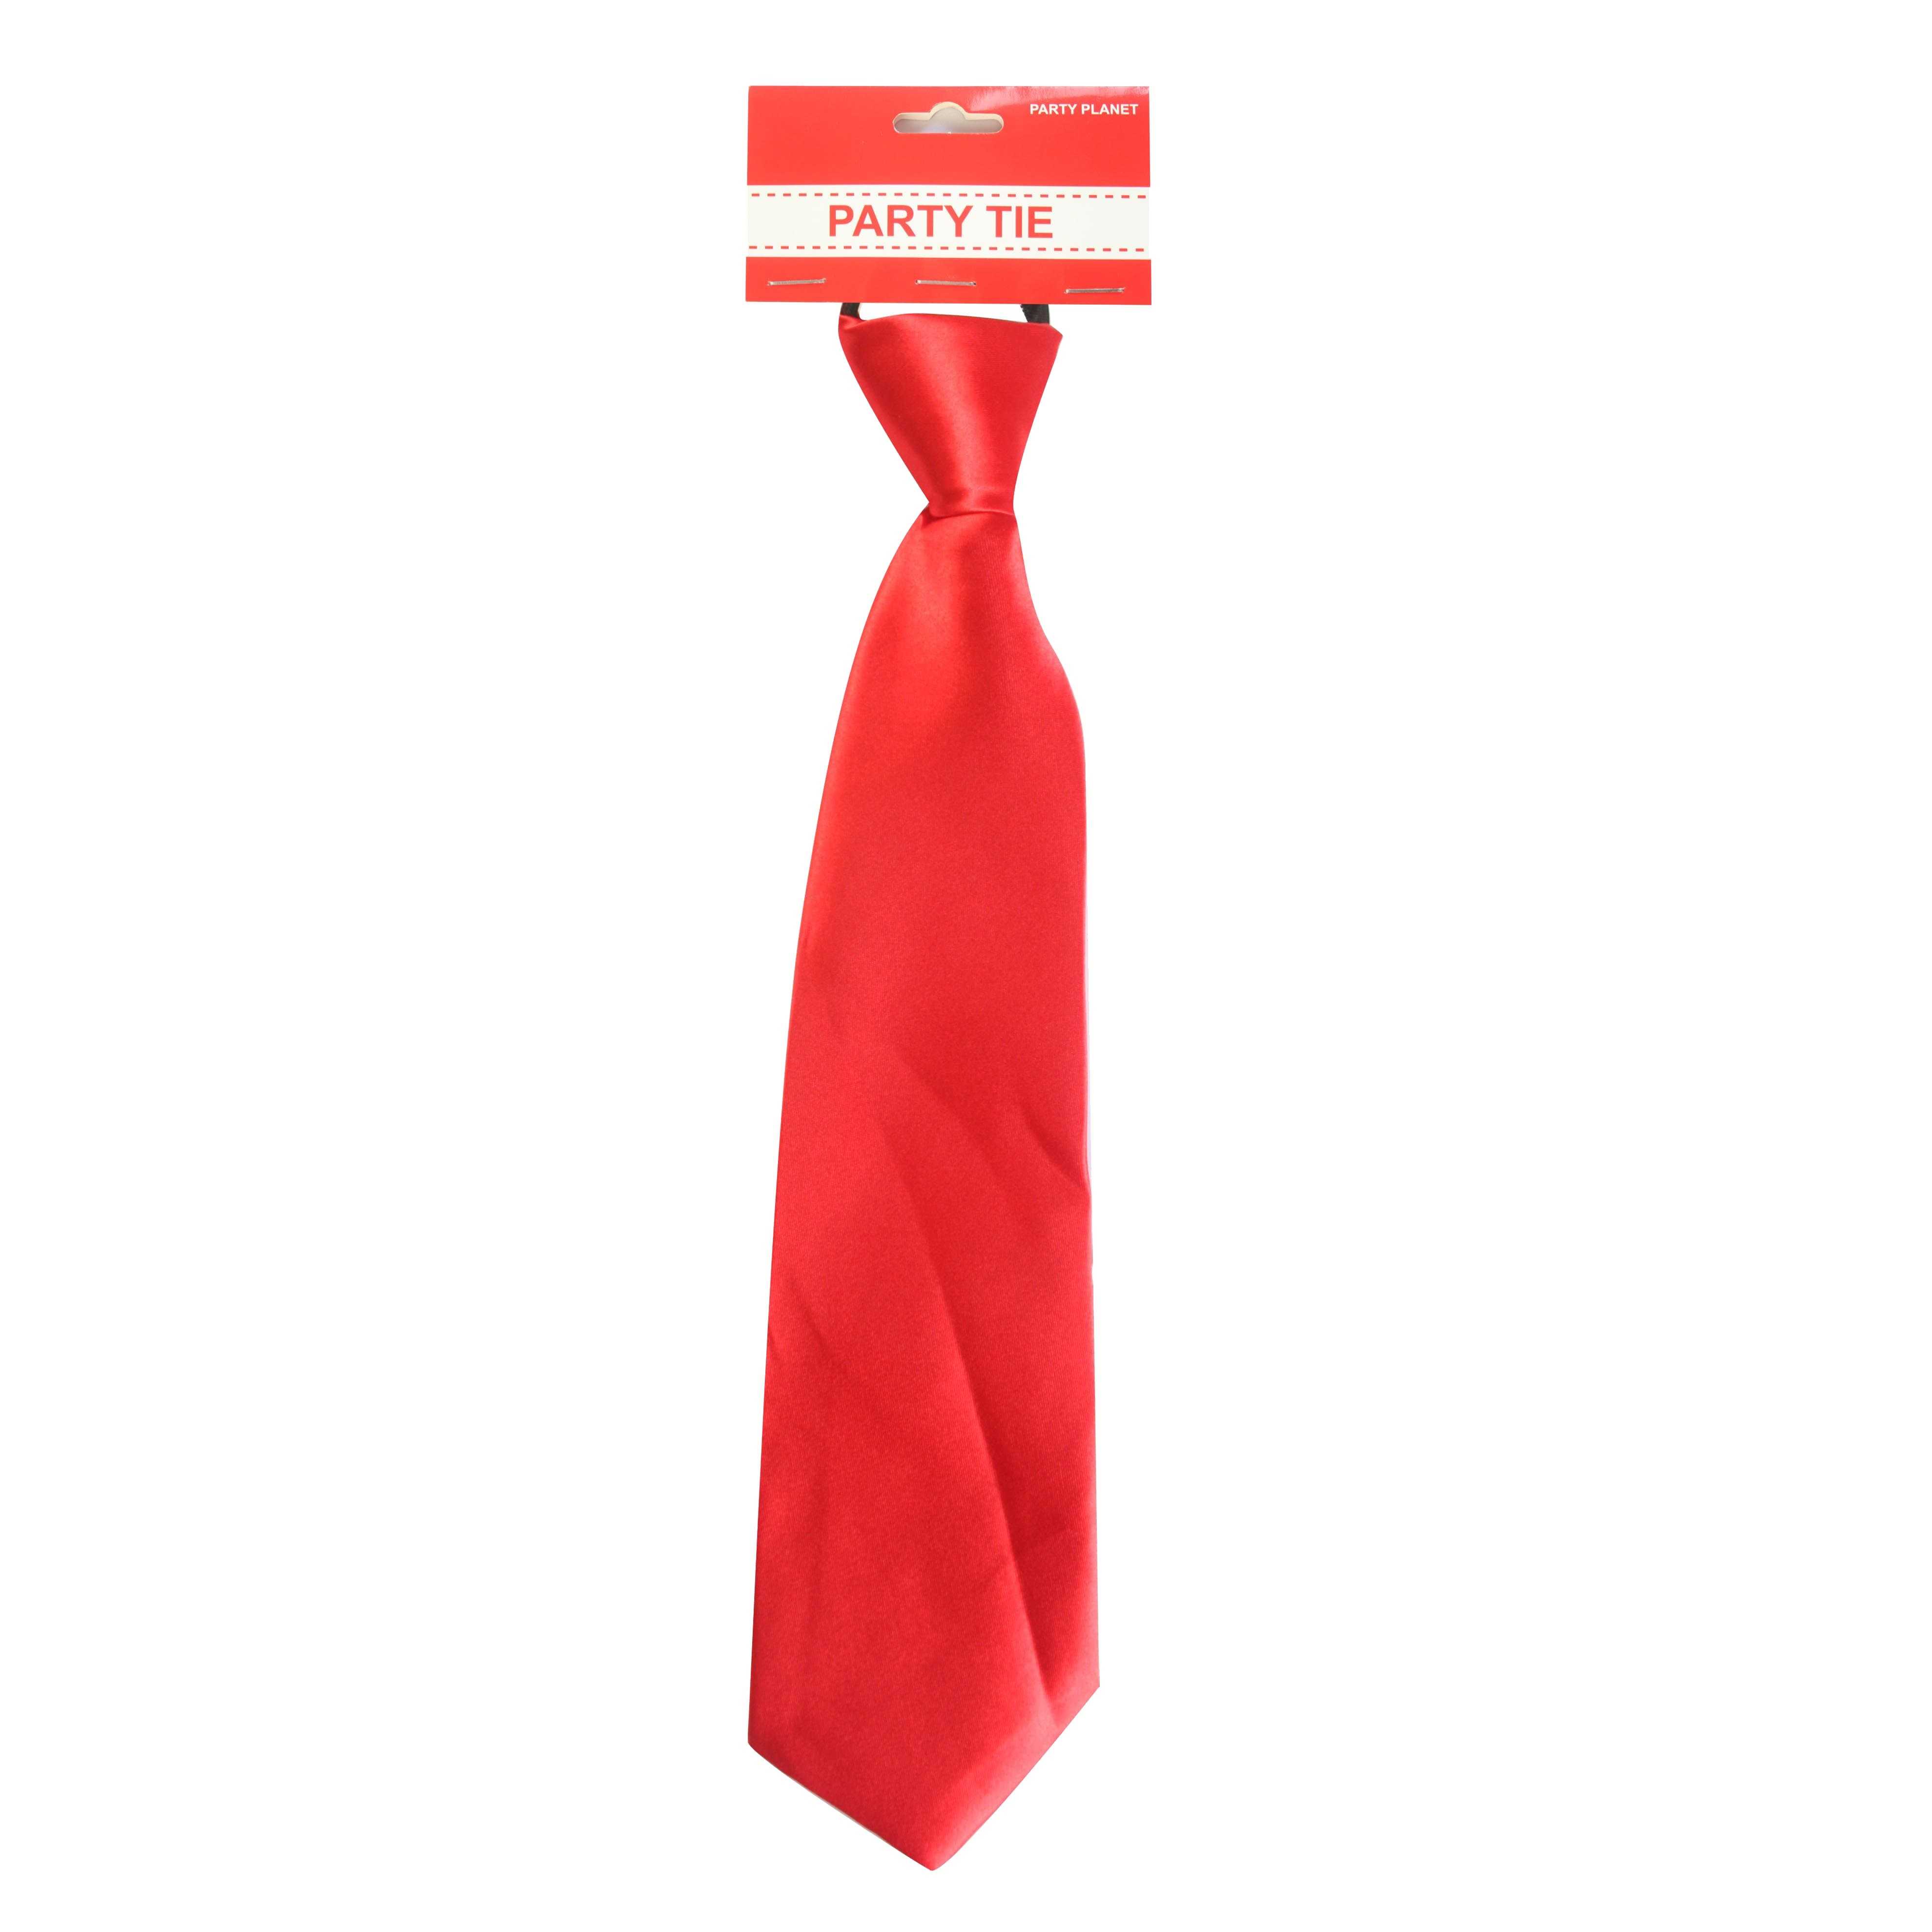 View Party Tie Solid Red